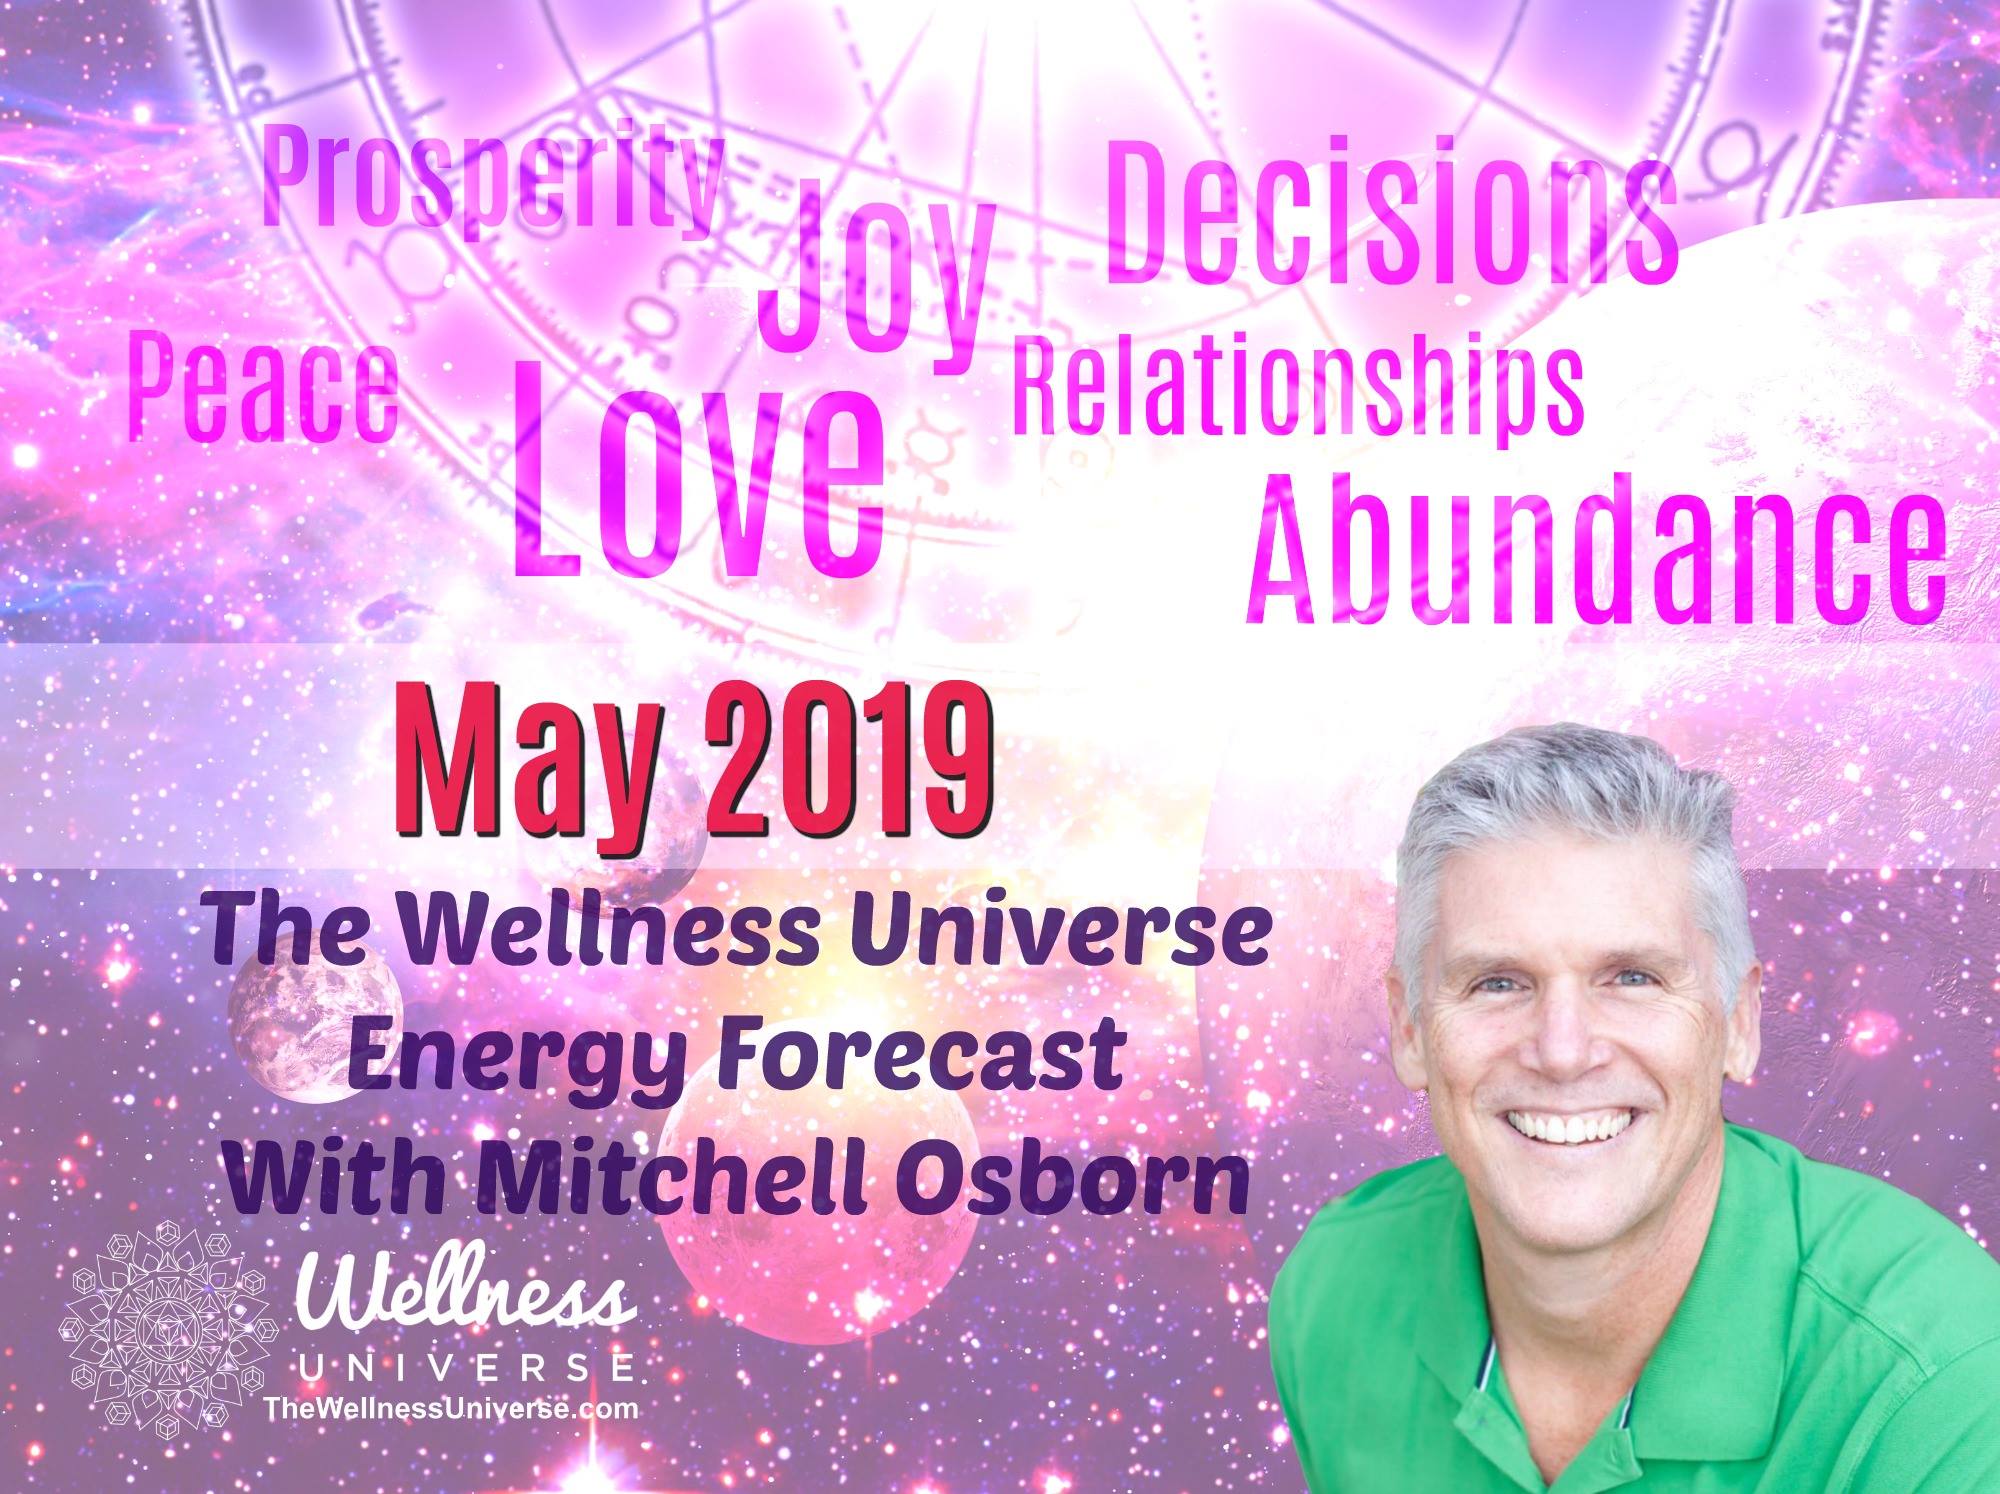 Energy Forecast for May 2019 with Mitchell Osborn #TheWellnessUniverse #WUVIP #ForecastForMay2019 #Energy #Forecast